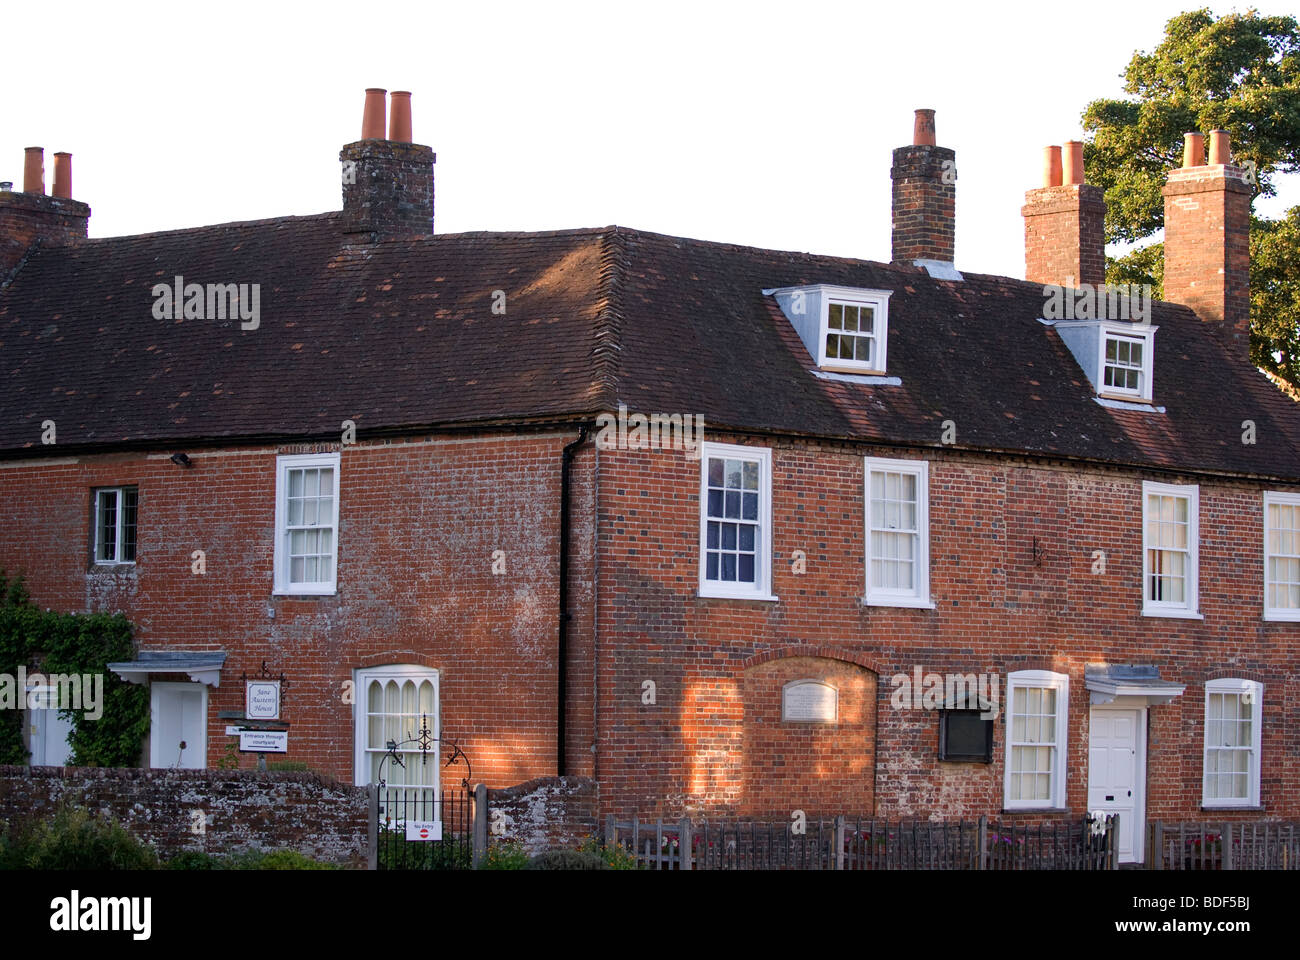 19th century English novelist Jane Austen's home from 1809 until 1817. She lived here with her mother and sister Cassandra... Stock Photo